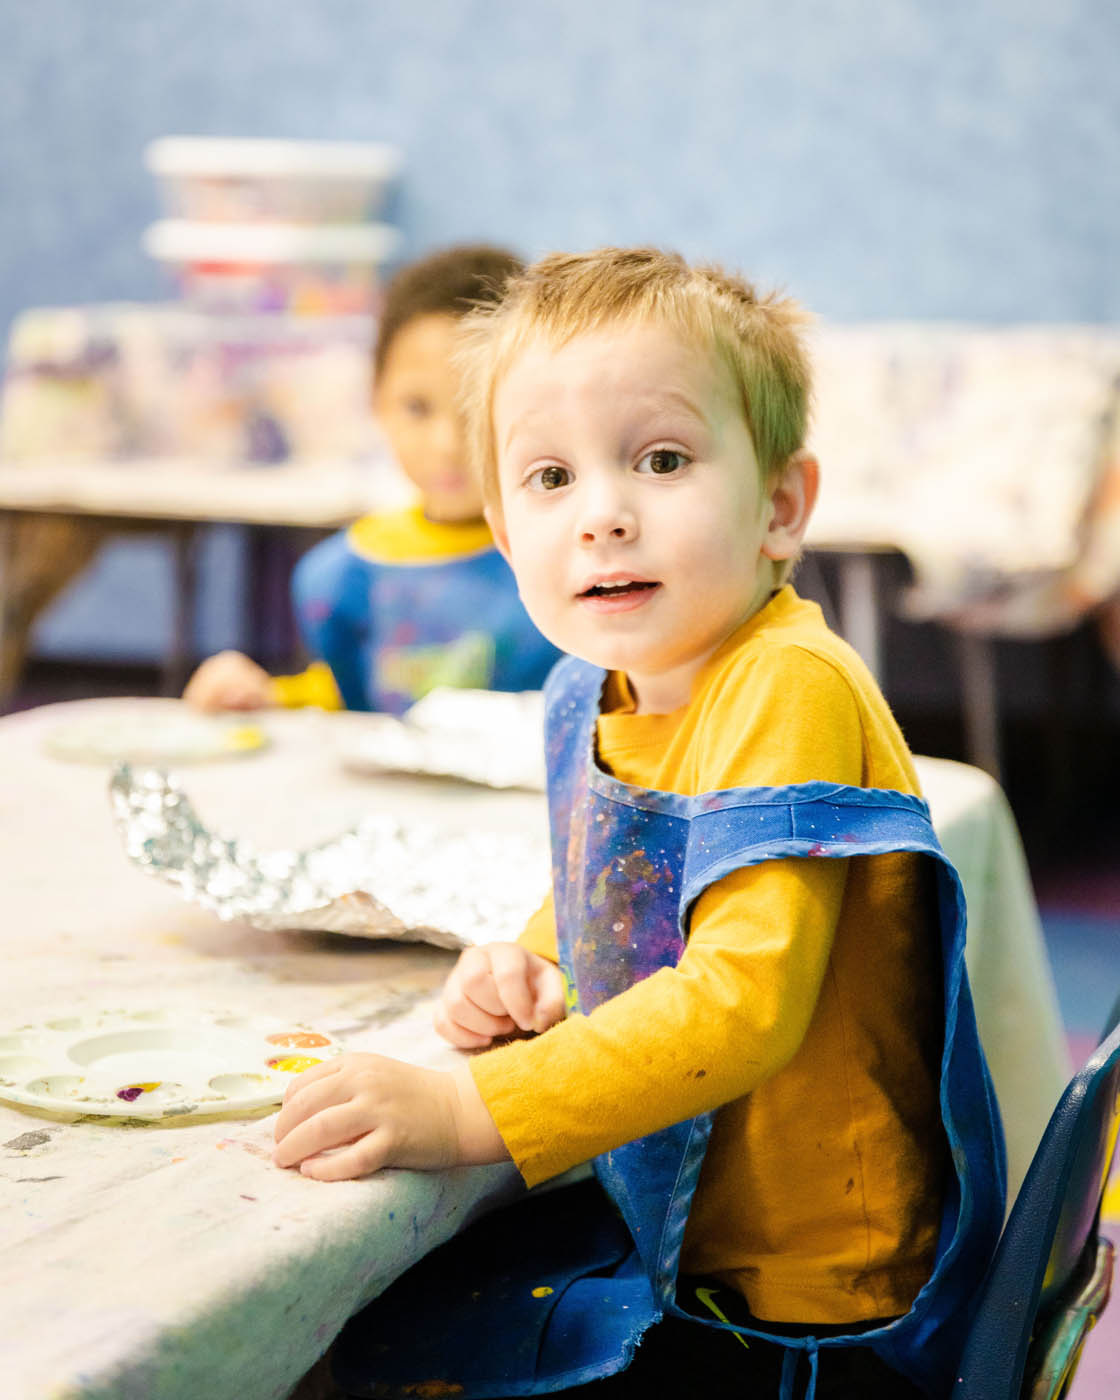 A boy in a yellow shirt in a Wethersfield toddler art class at Romp n' Roll.